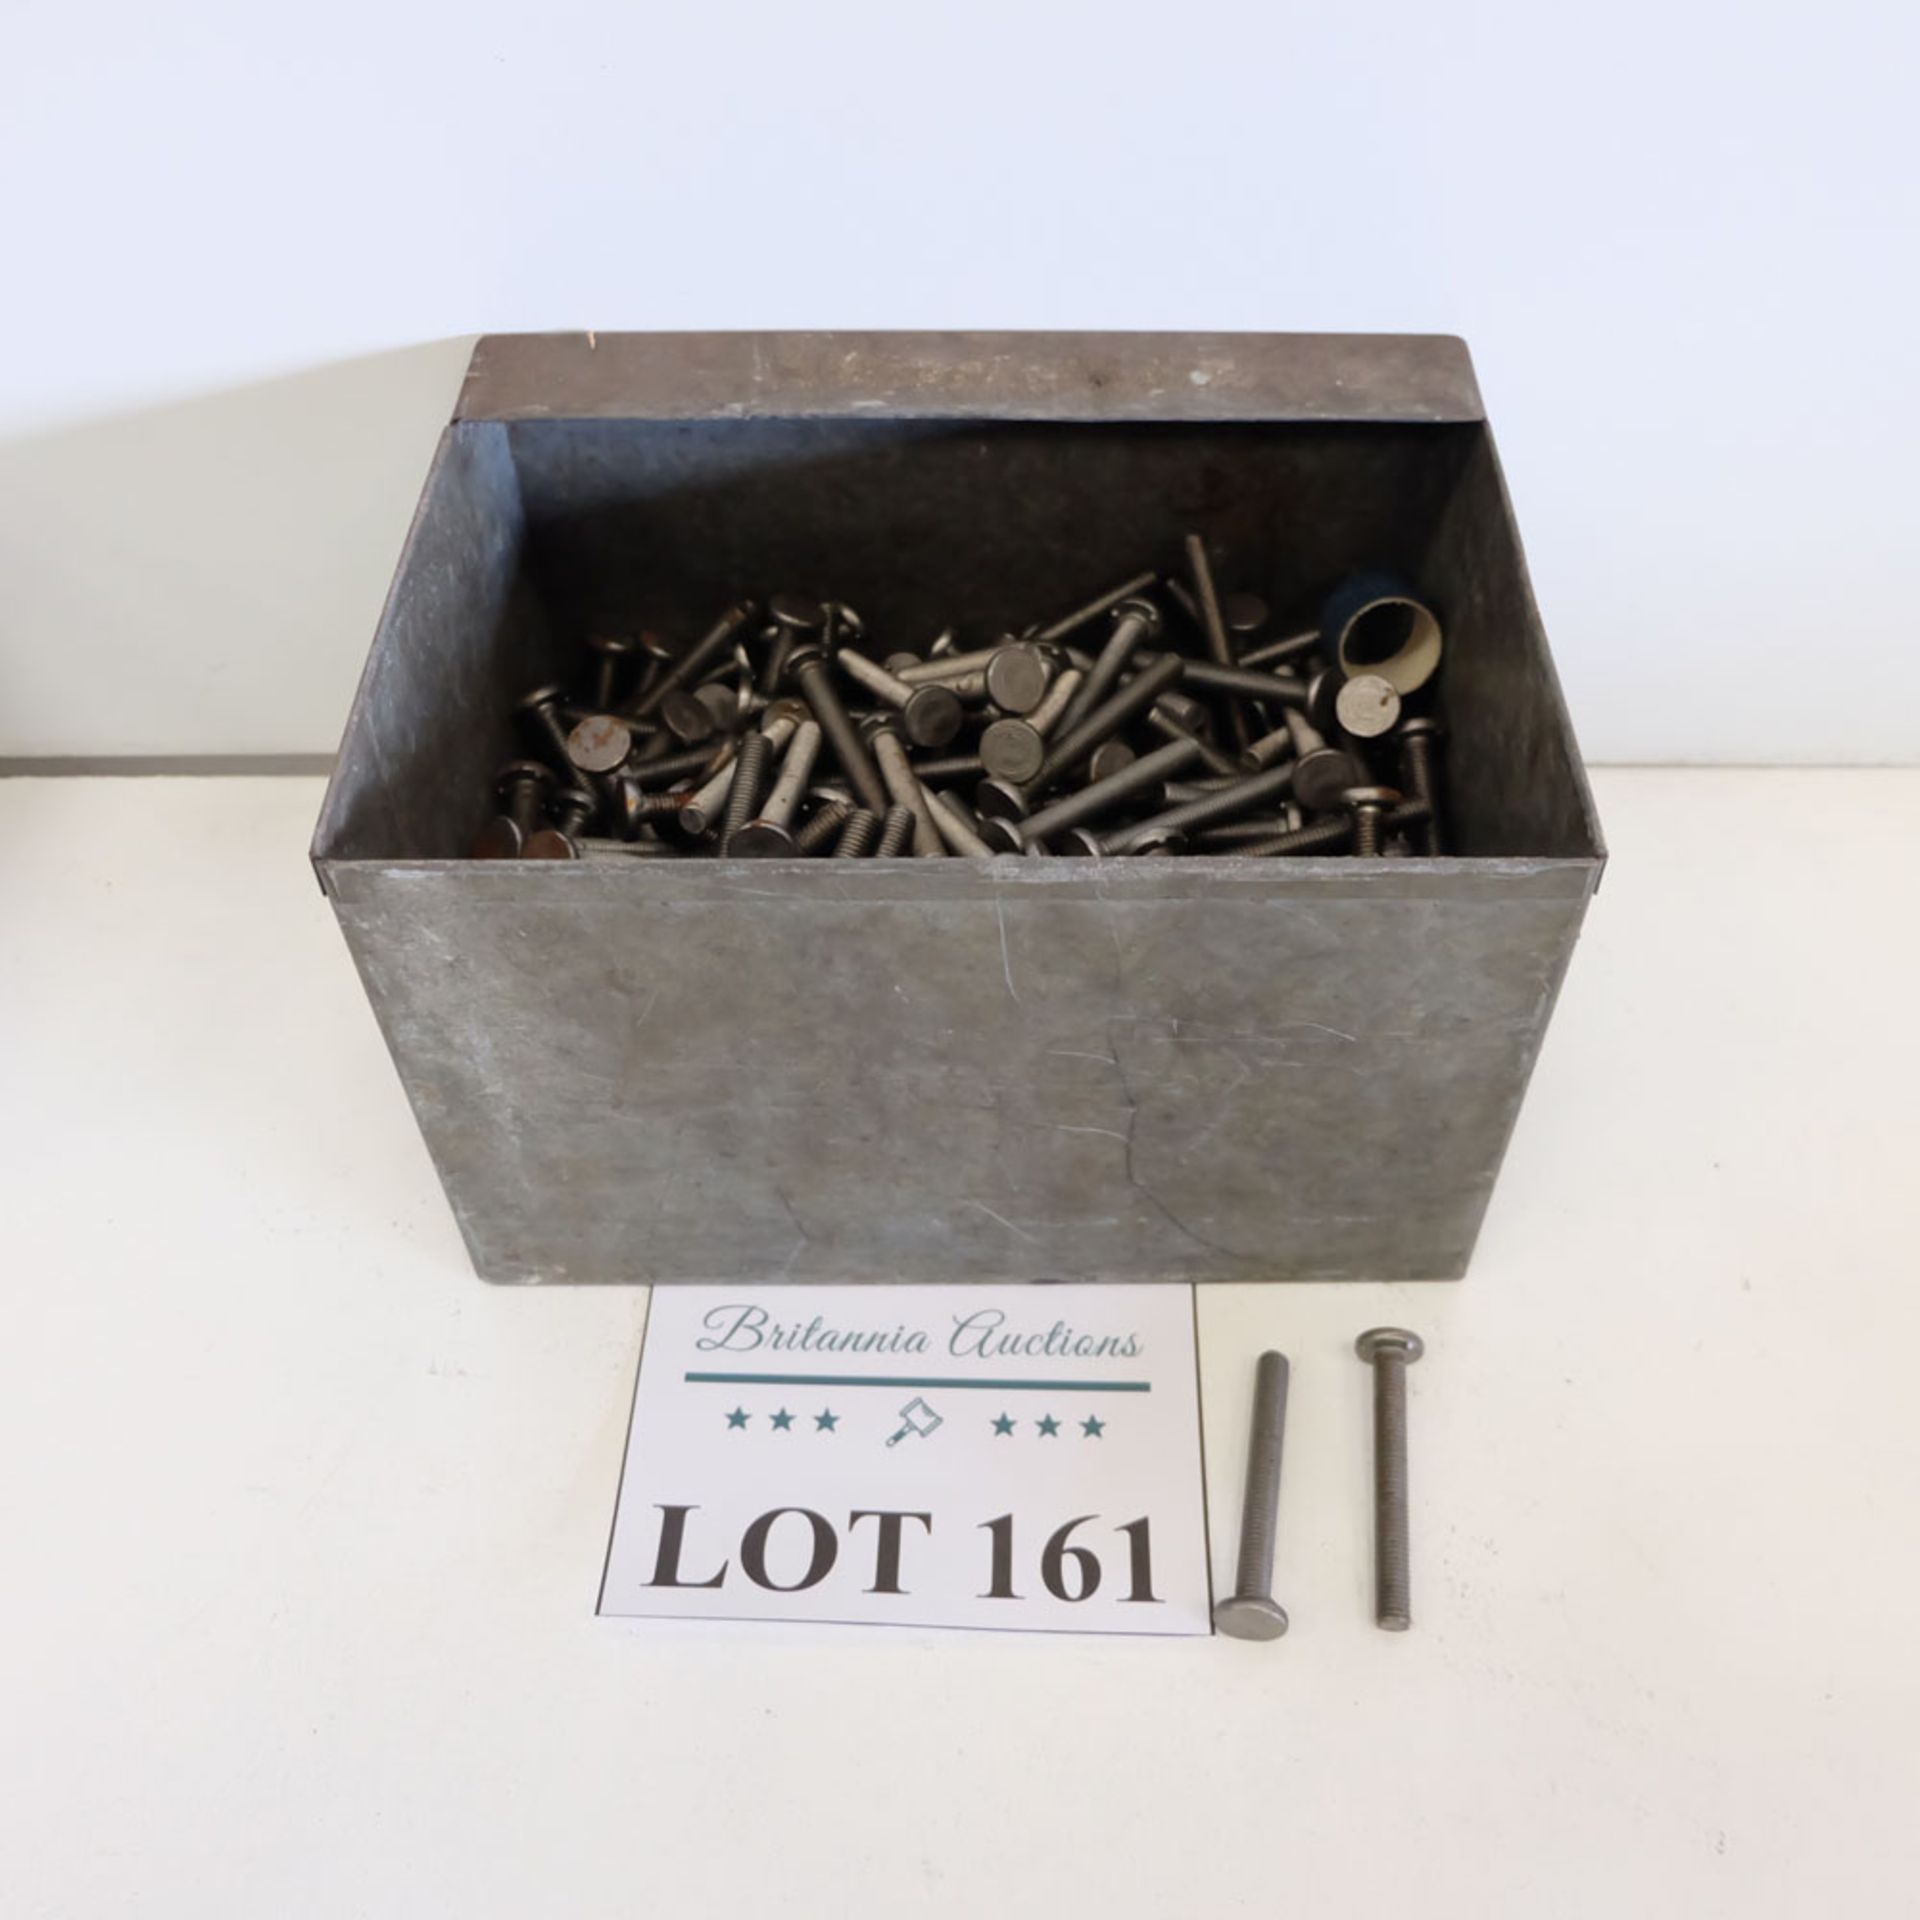 Quantity of Weld Bolts as Lotted. Labelled M8 x 65 Weld Bolt.